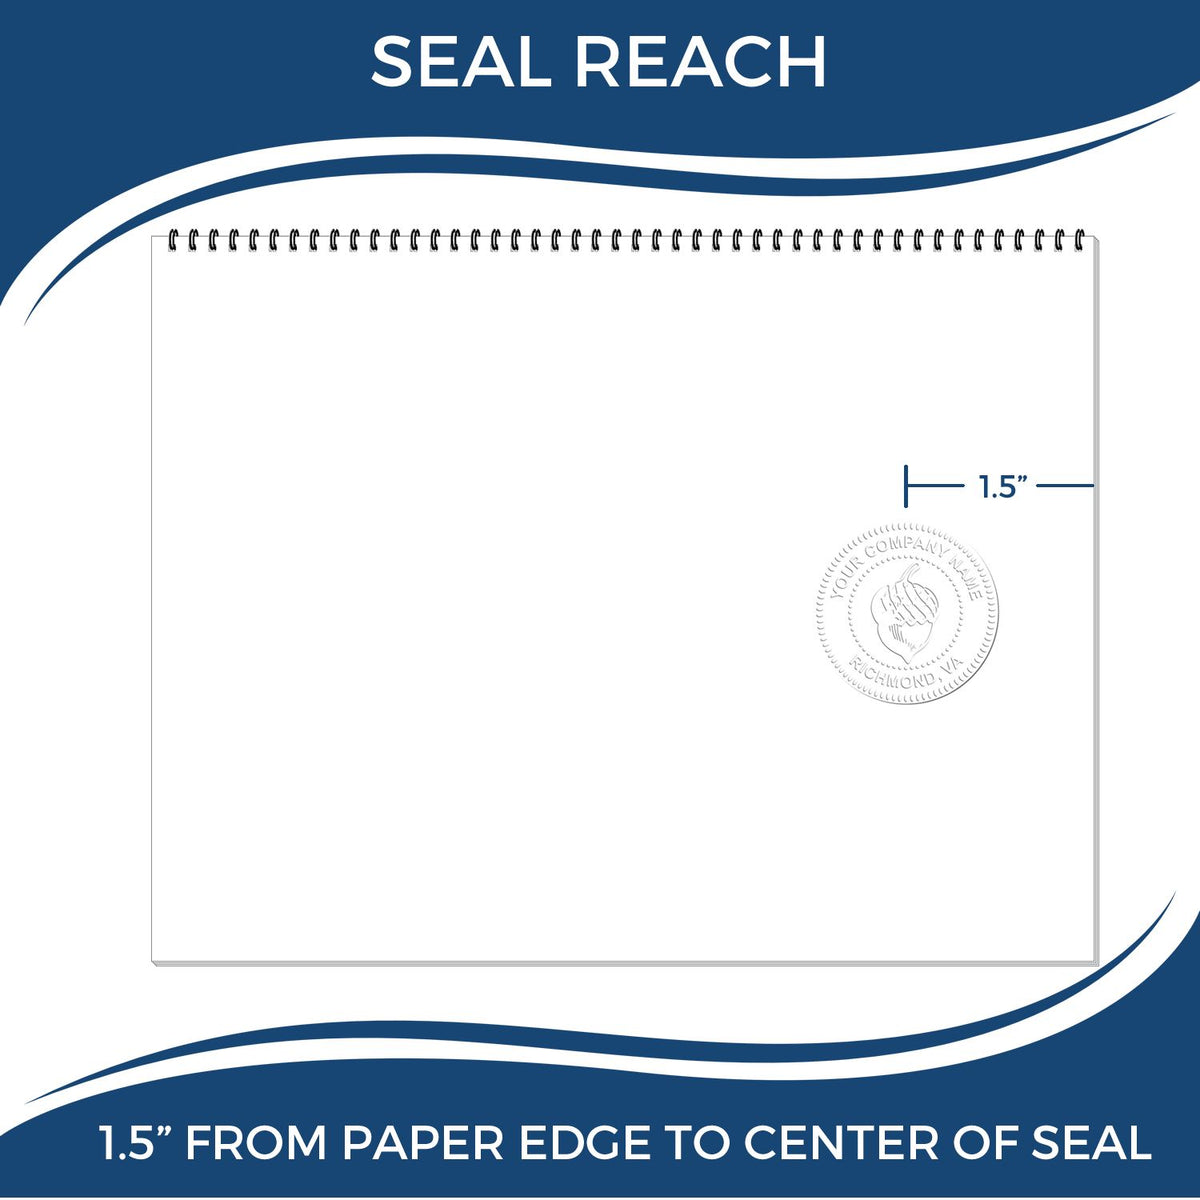 An infographic showing the seal reach which is represented by a ruler and a miniature seal image of the New York Engineer Desk Seal